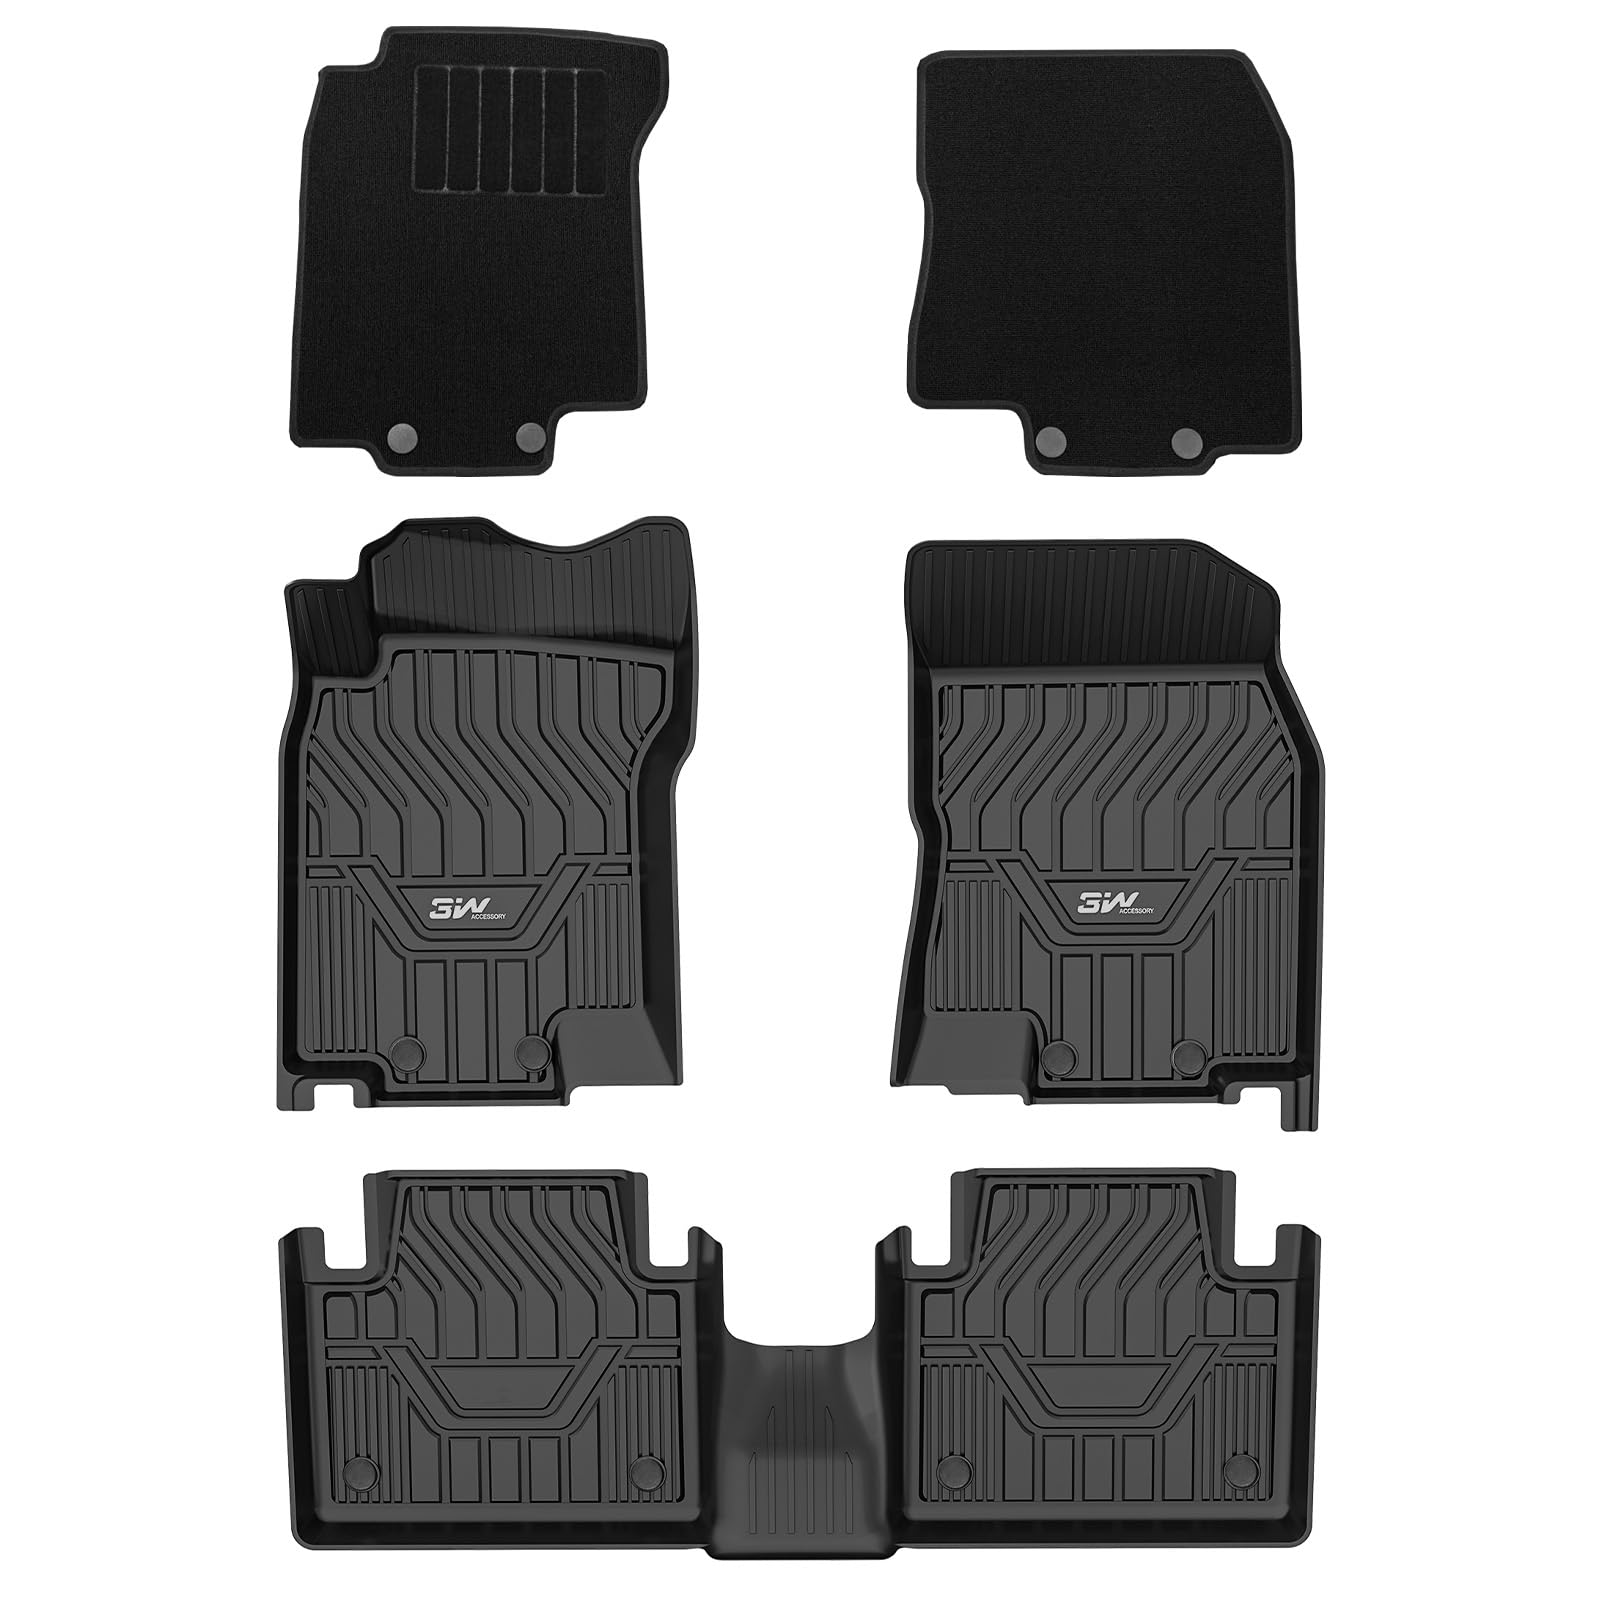 3W Acura RDX 2019-2024 Custom Floor Mats TPE Material & All-Weather Protection Vehicles & Parts 3Wliners 2019-2024 RDX 2019-2024 1st&2nd Row with Carpets